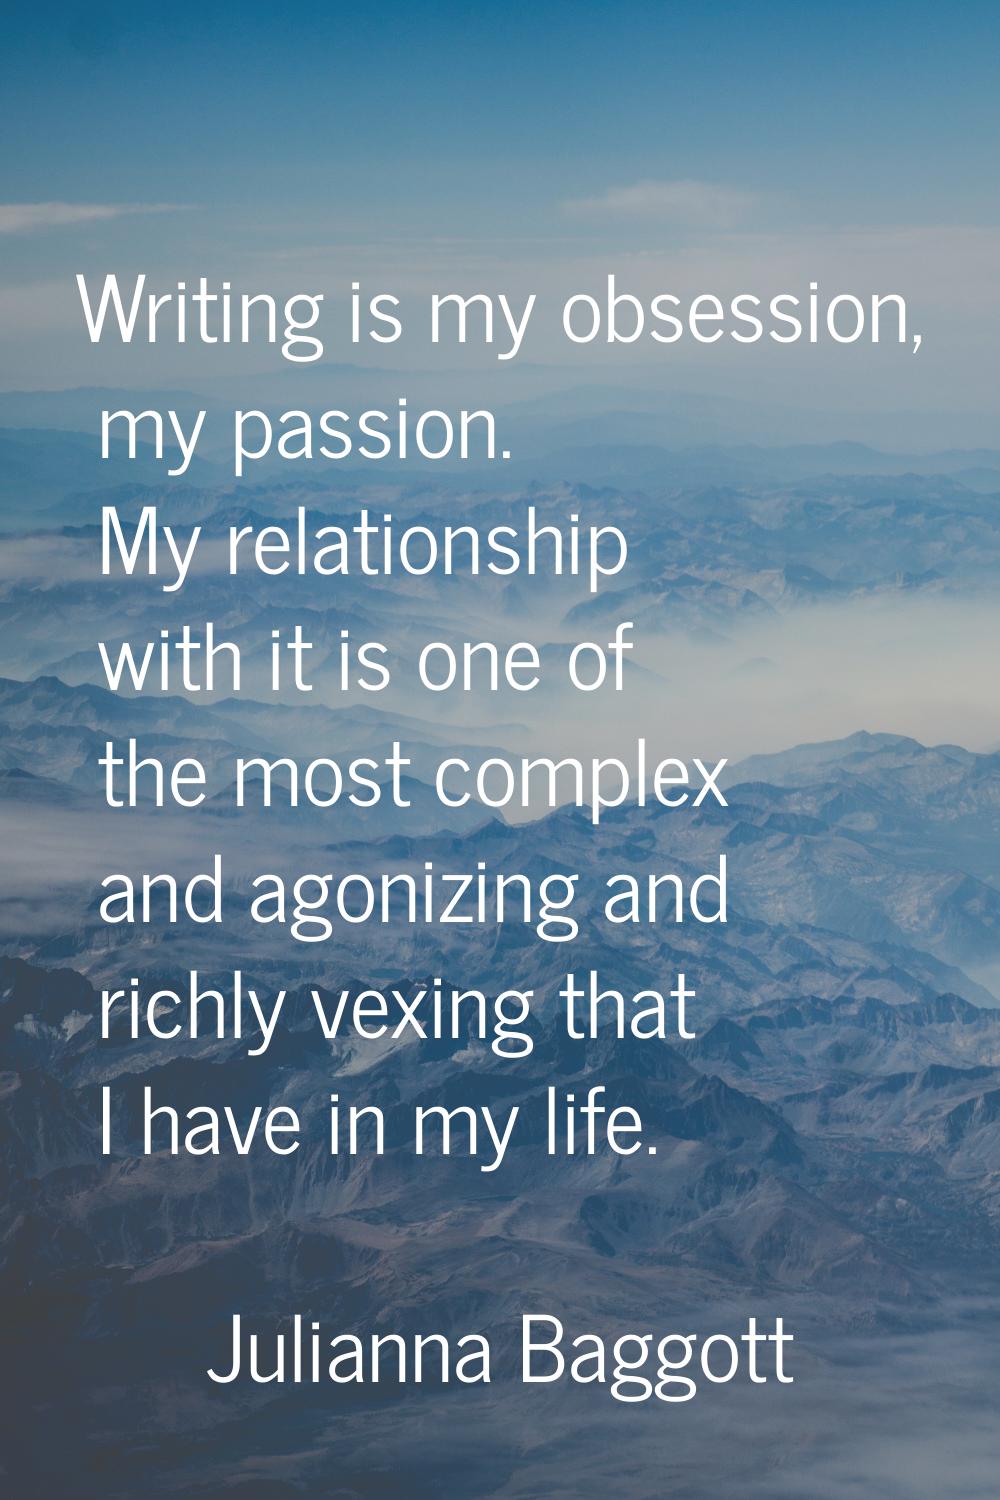 Writing is my obsession, my passion. My relationship with it is one of the most complex and agonizi